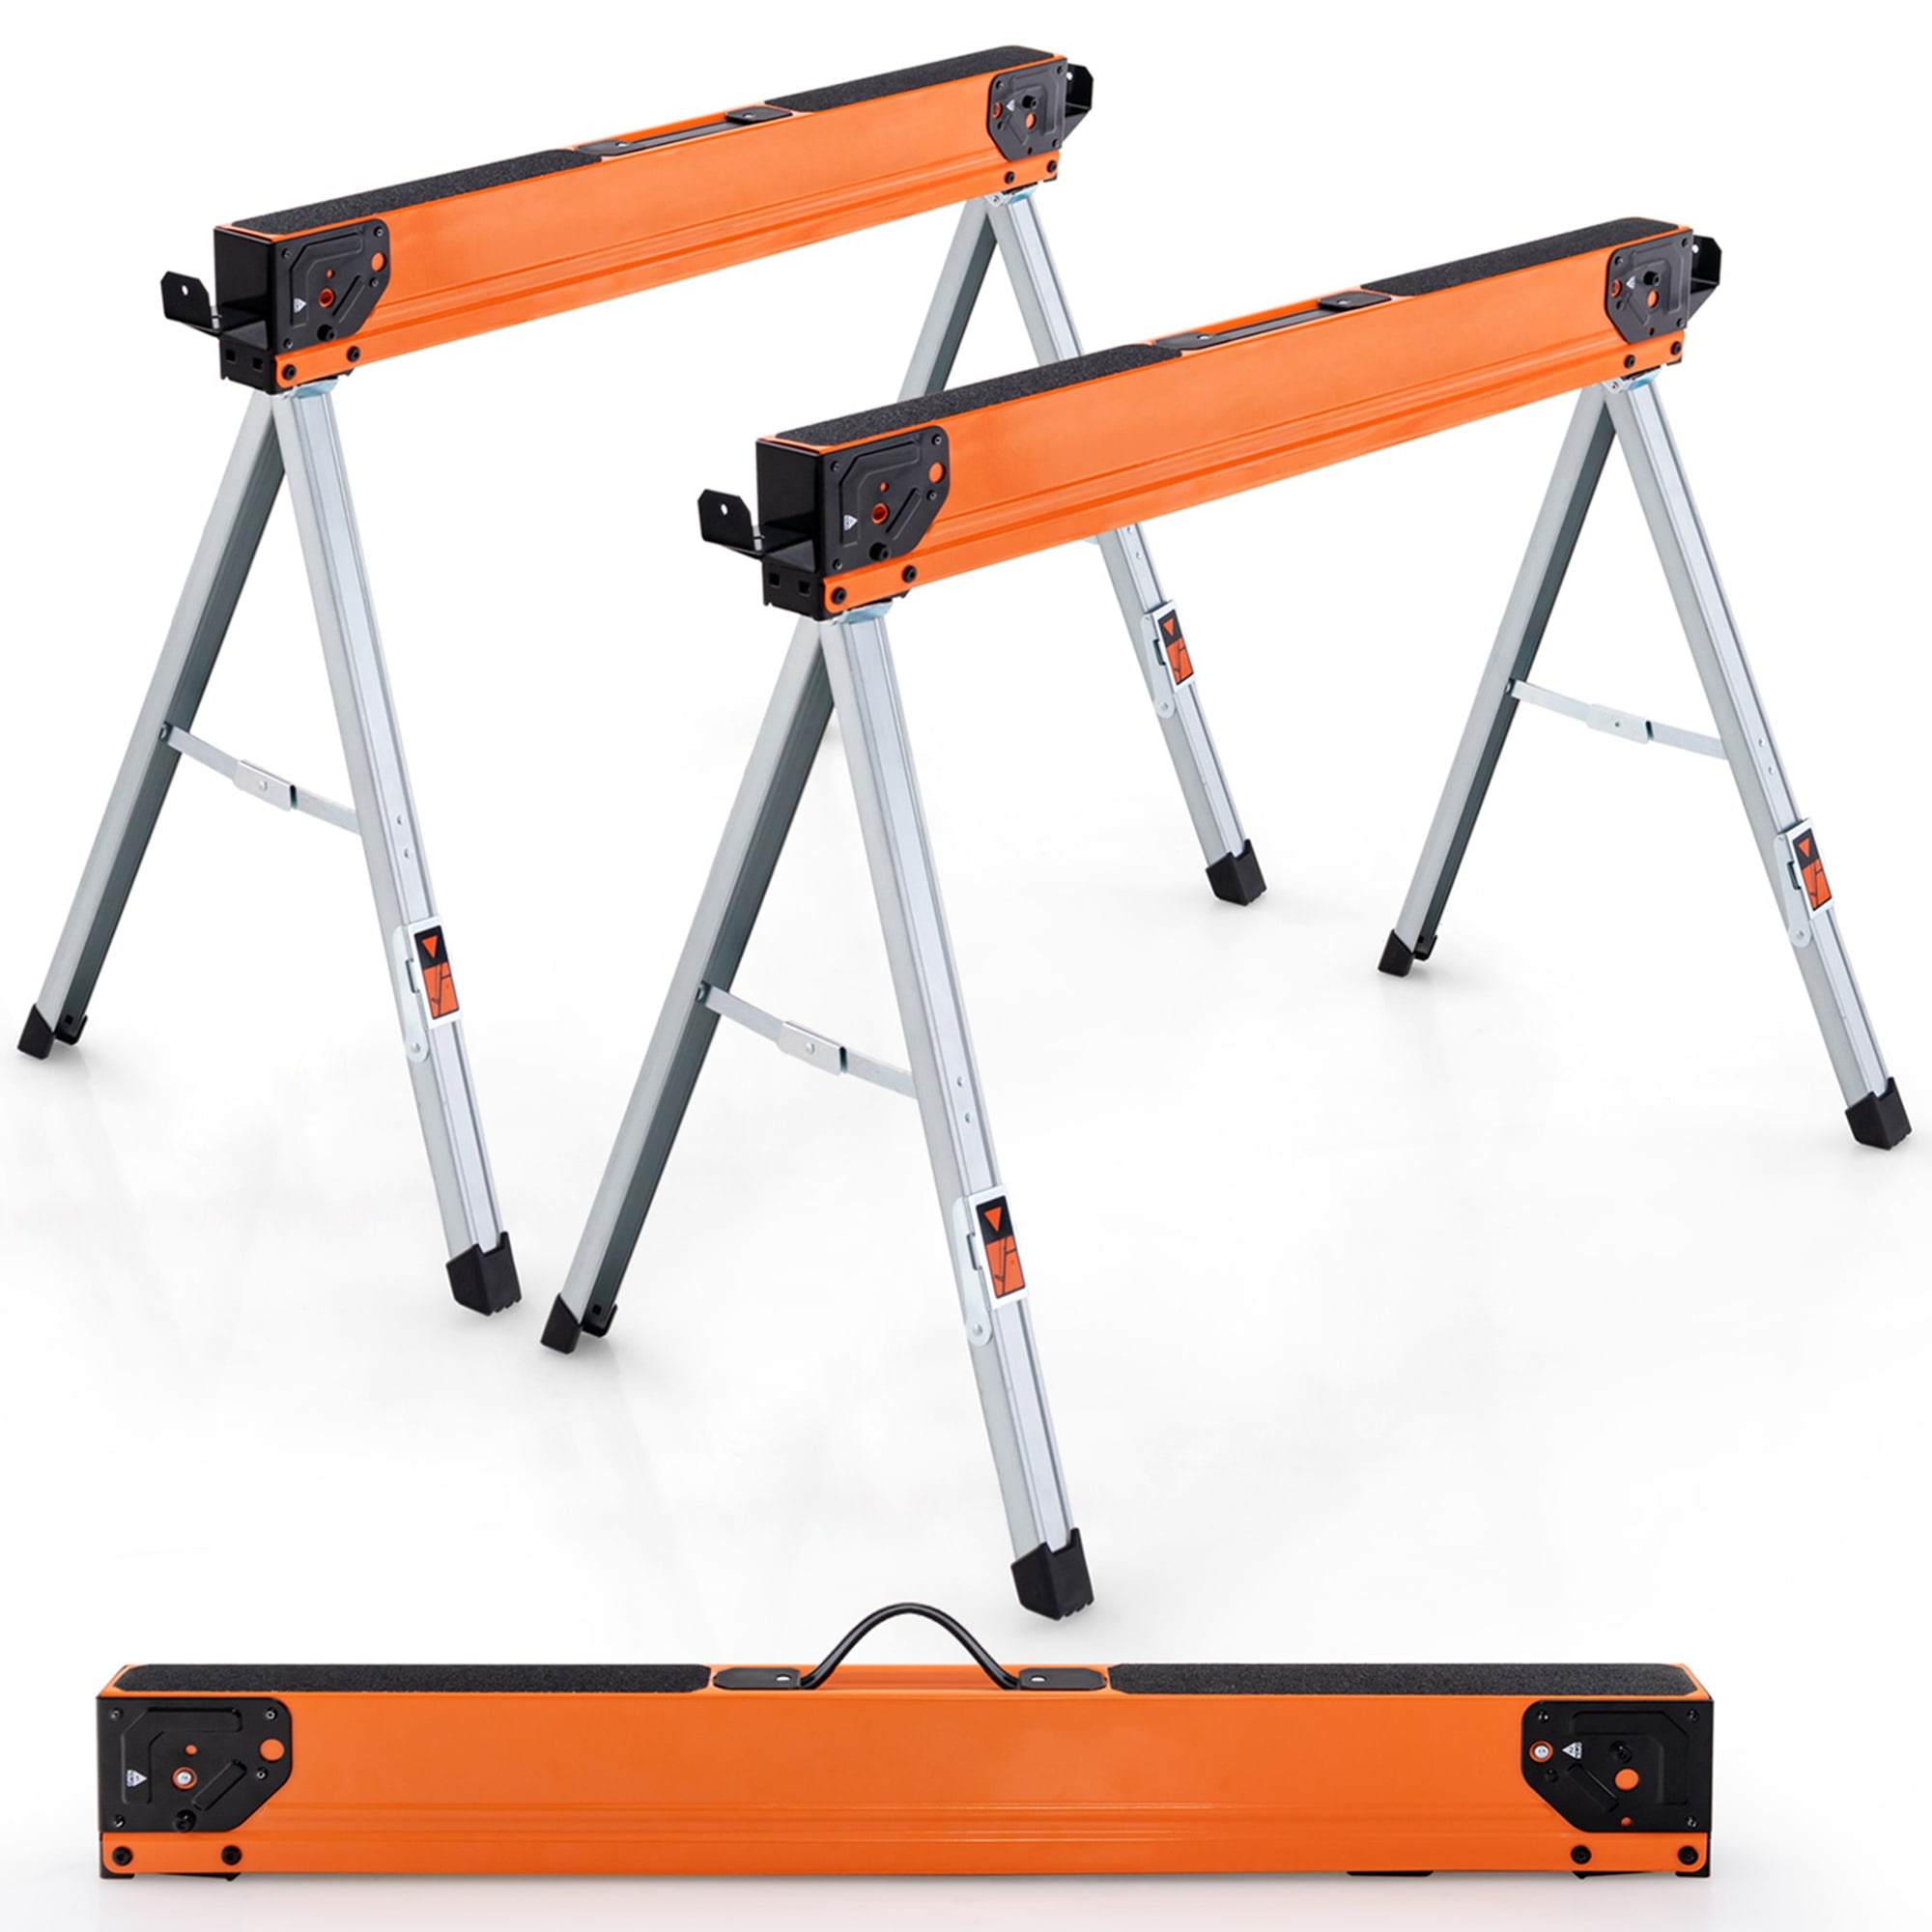 Costway 2 Pack Saw Horses Portable Sawhorses with Folding Design Non ...